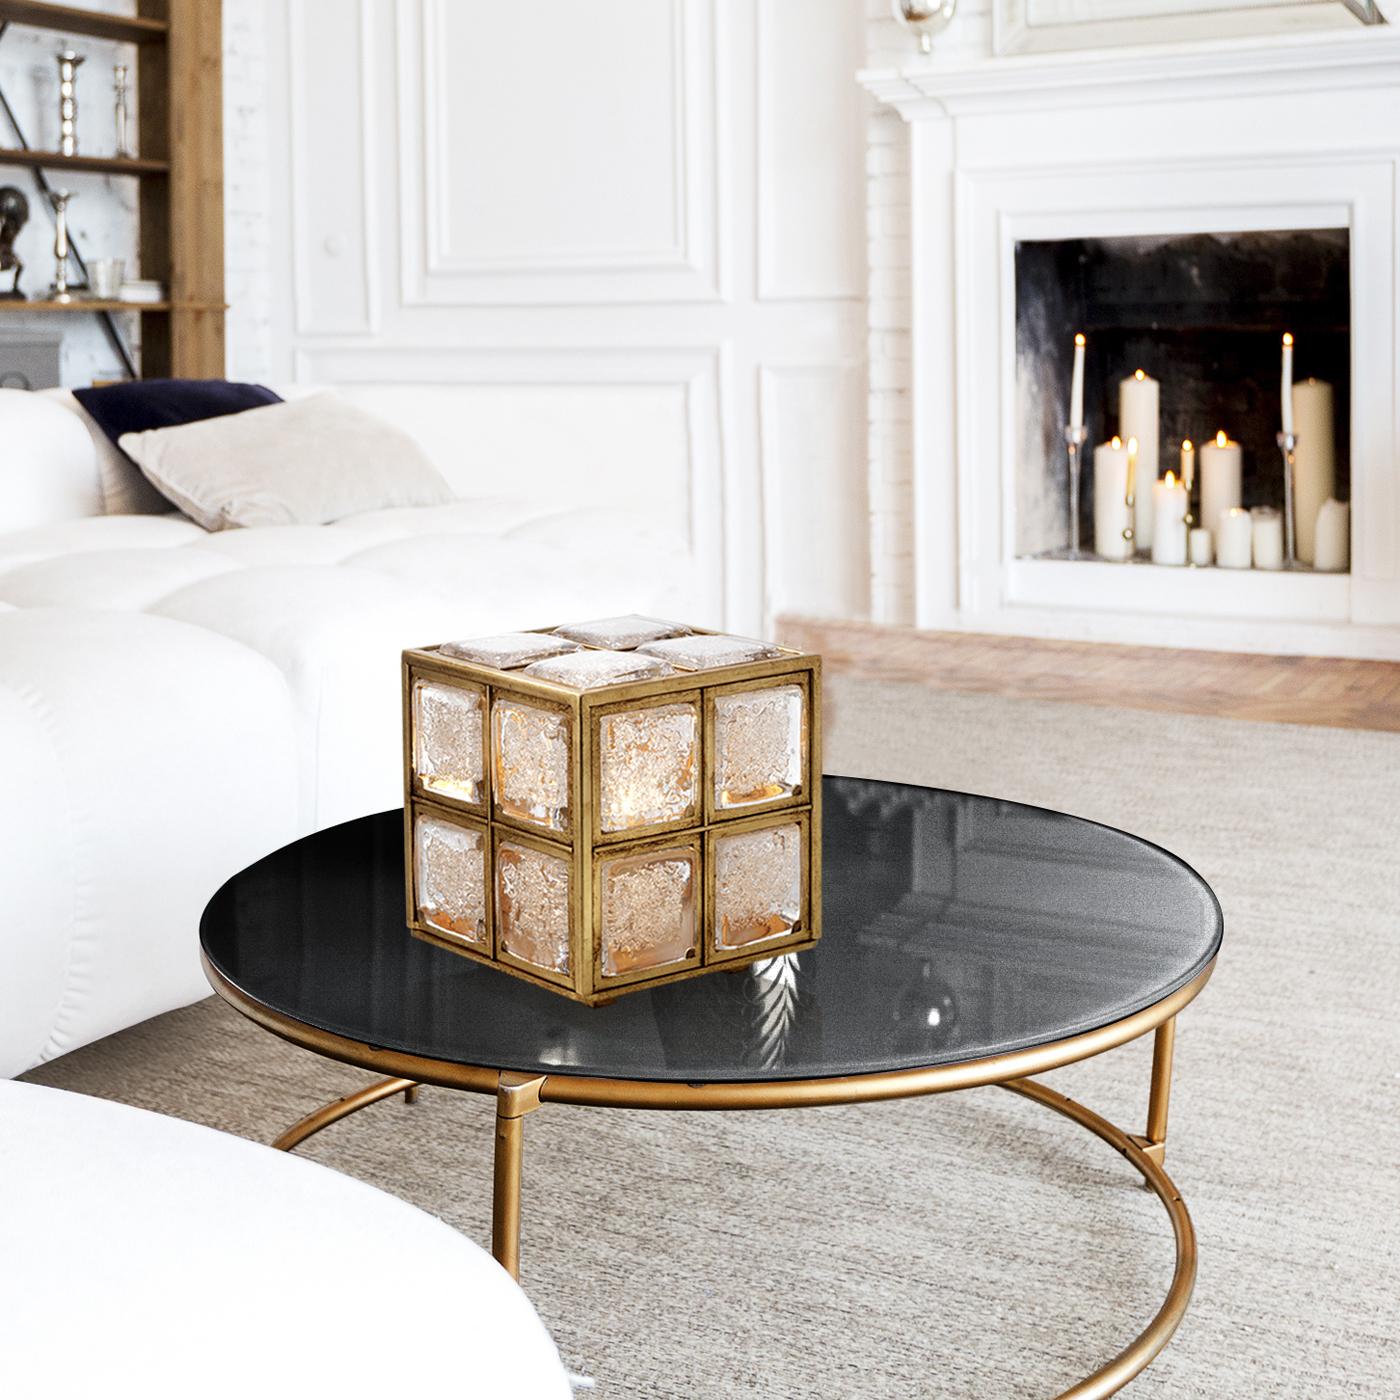 The plush cubic structure of this table lamp is a one-off example of expert craftsmanship that gives life to a unique object of timeless allure. The gold leaf-covered metal frame hosts an ES bulb (E27 and max 70W) that casts an intense light through